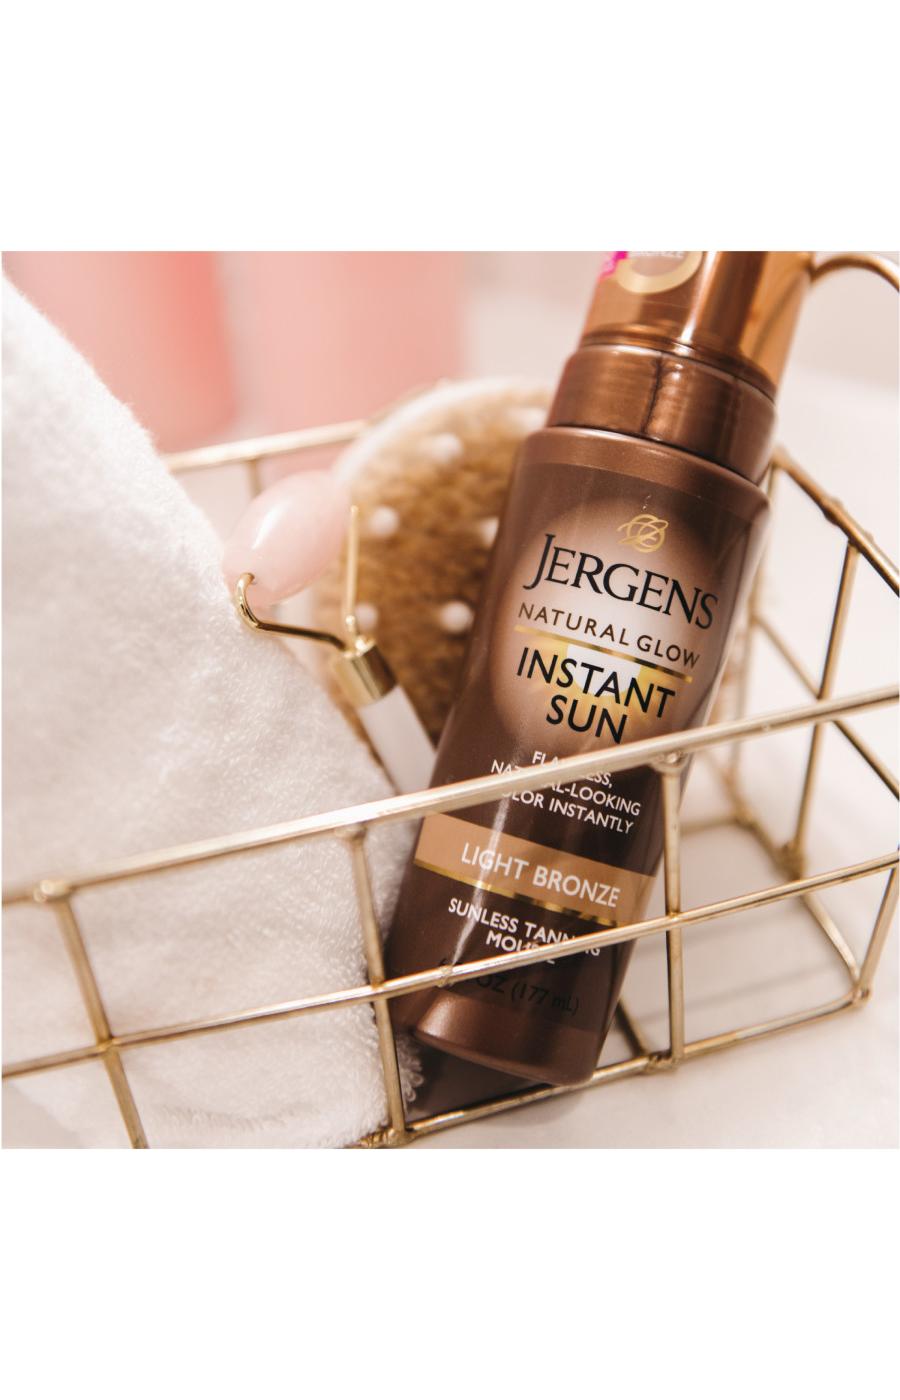 Jergens Natural Glow Instant Sun Light Bronze Tanning Mousse; image 10 of 10